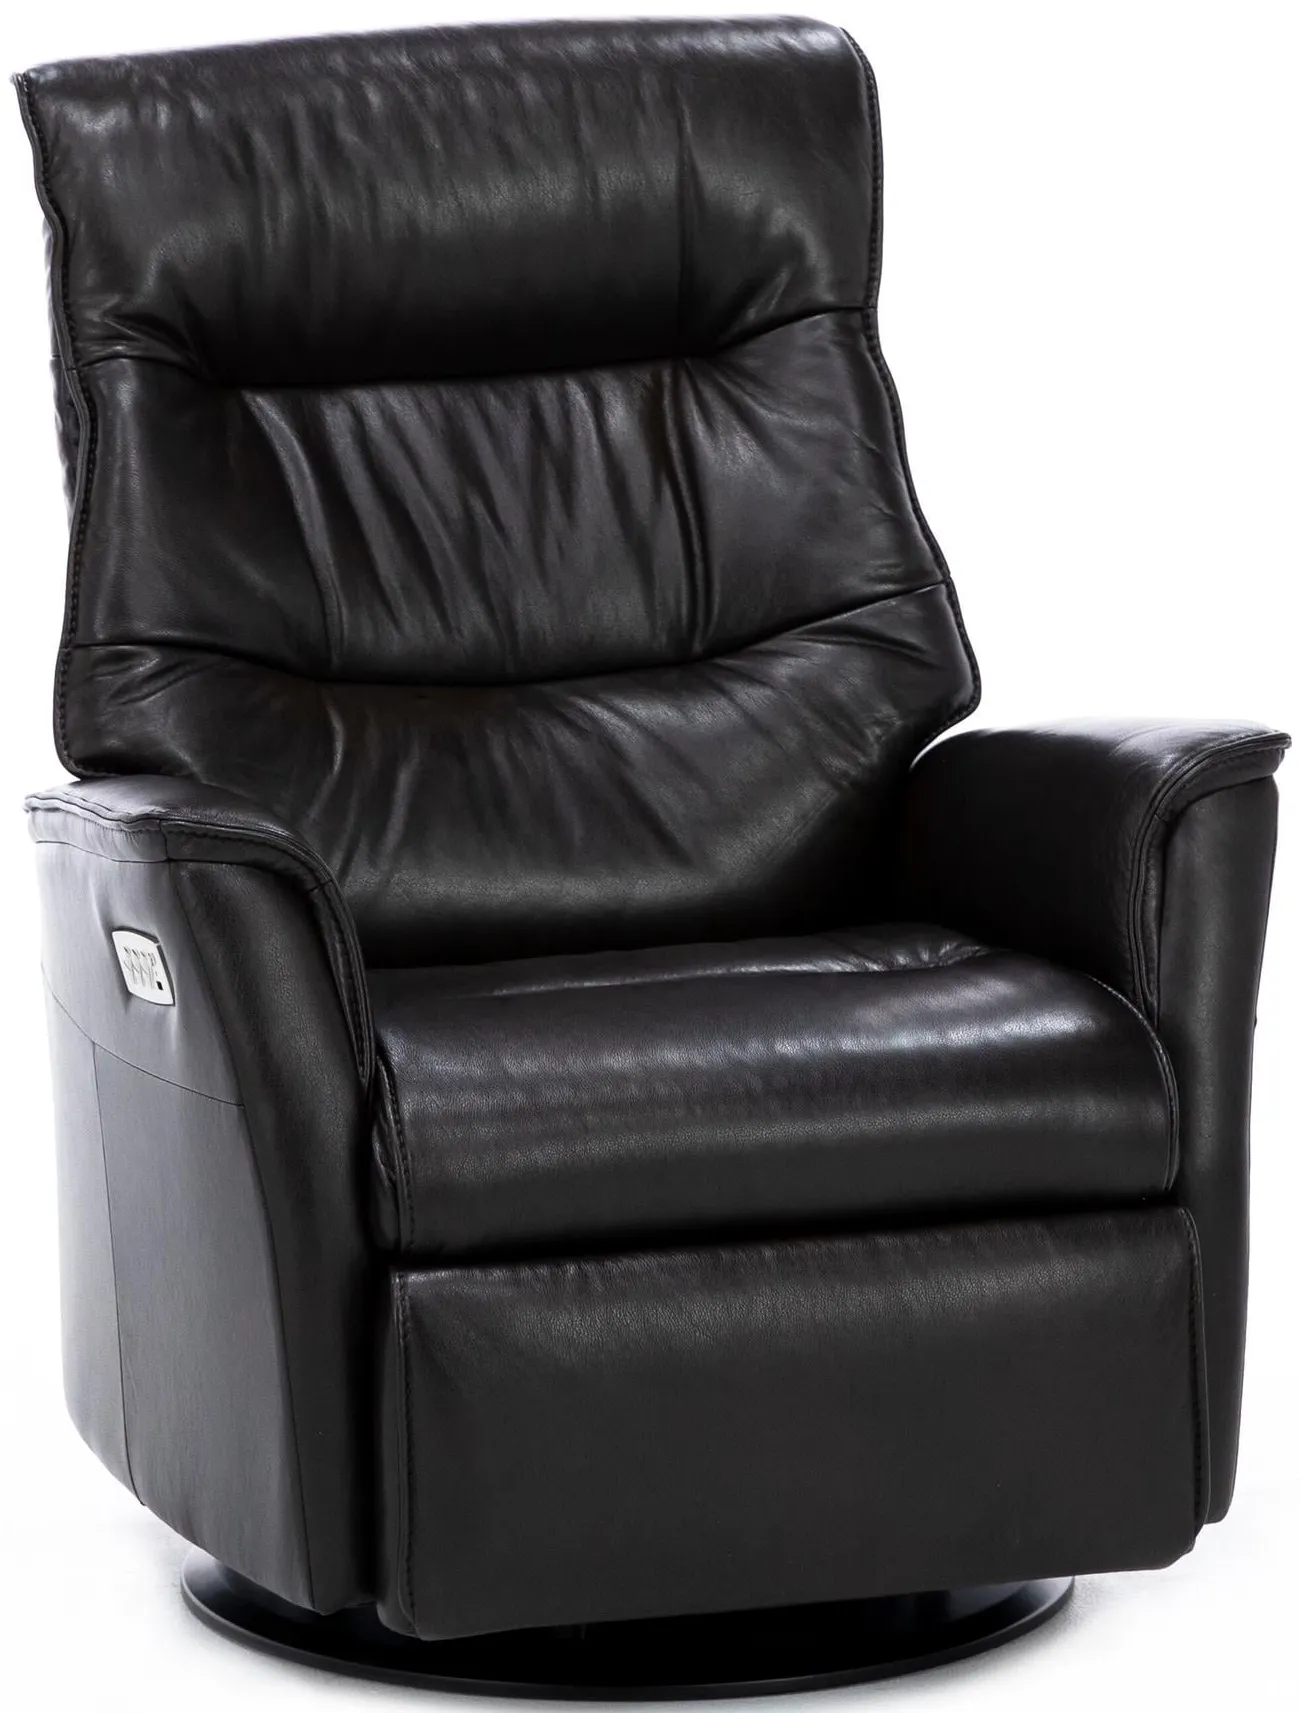 Direct Designs® Chelsie Leather Fully Loaded Large Swivel Gliding Recliner in Dark Brown